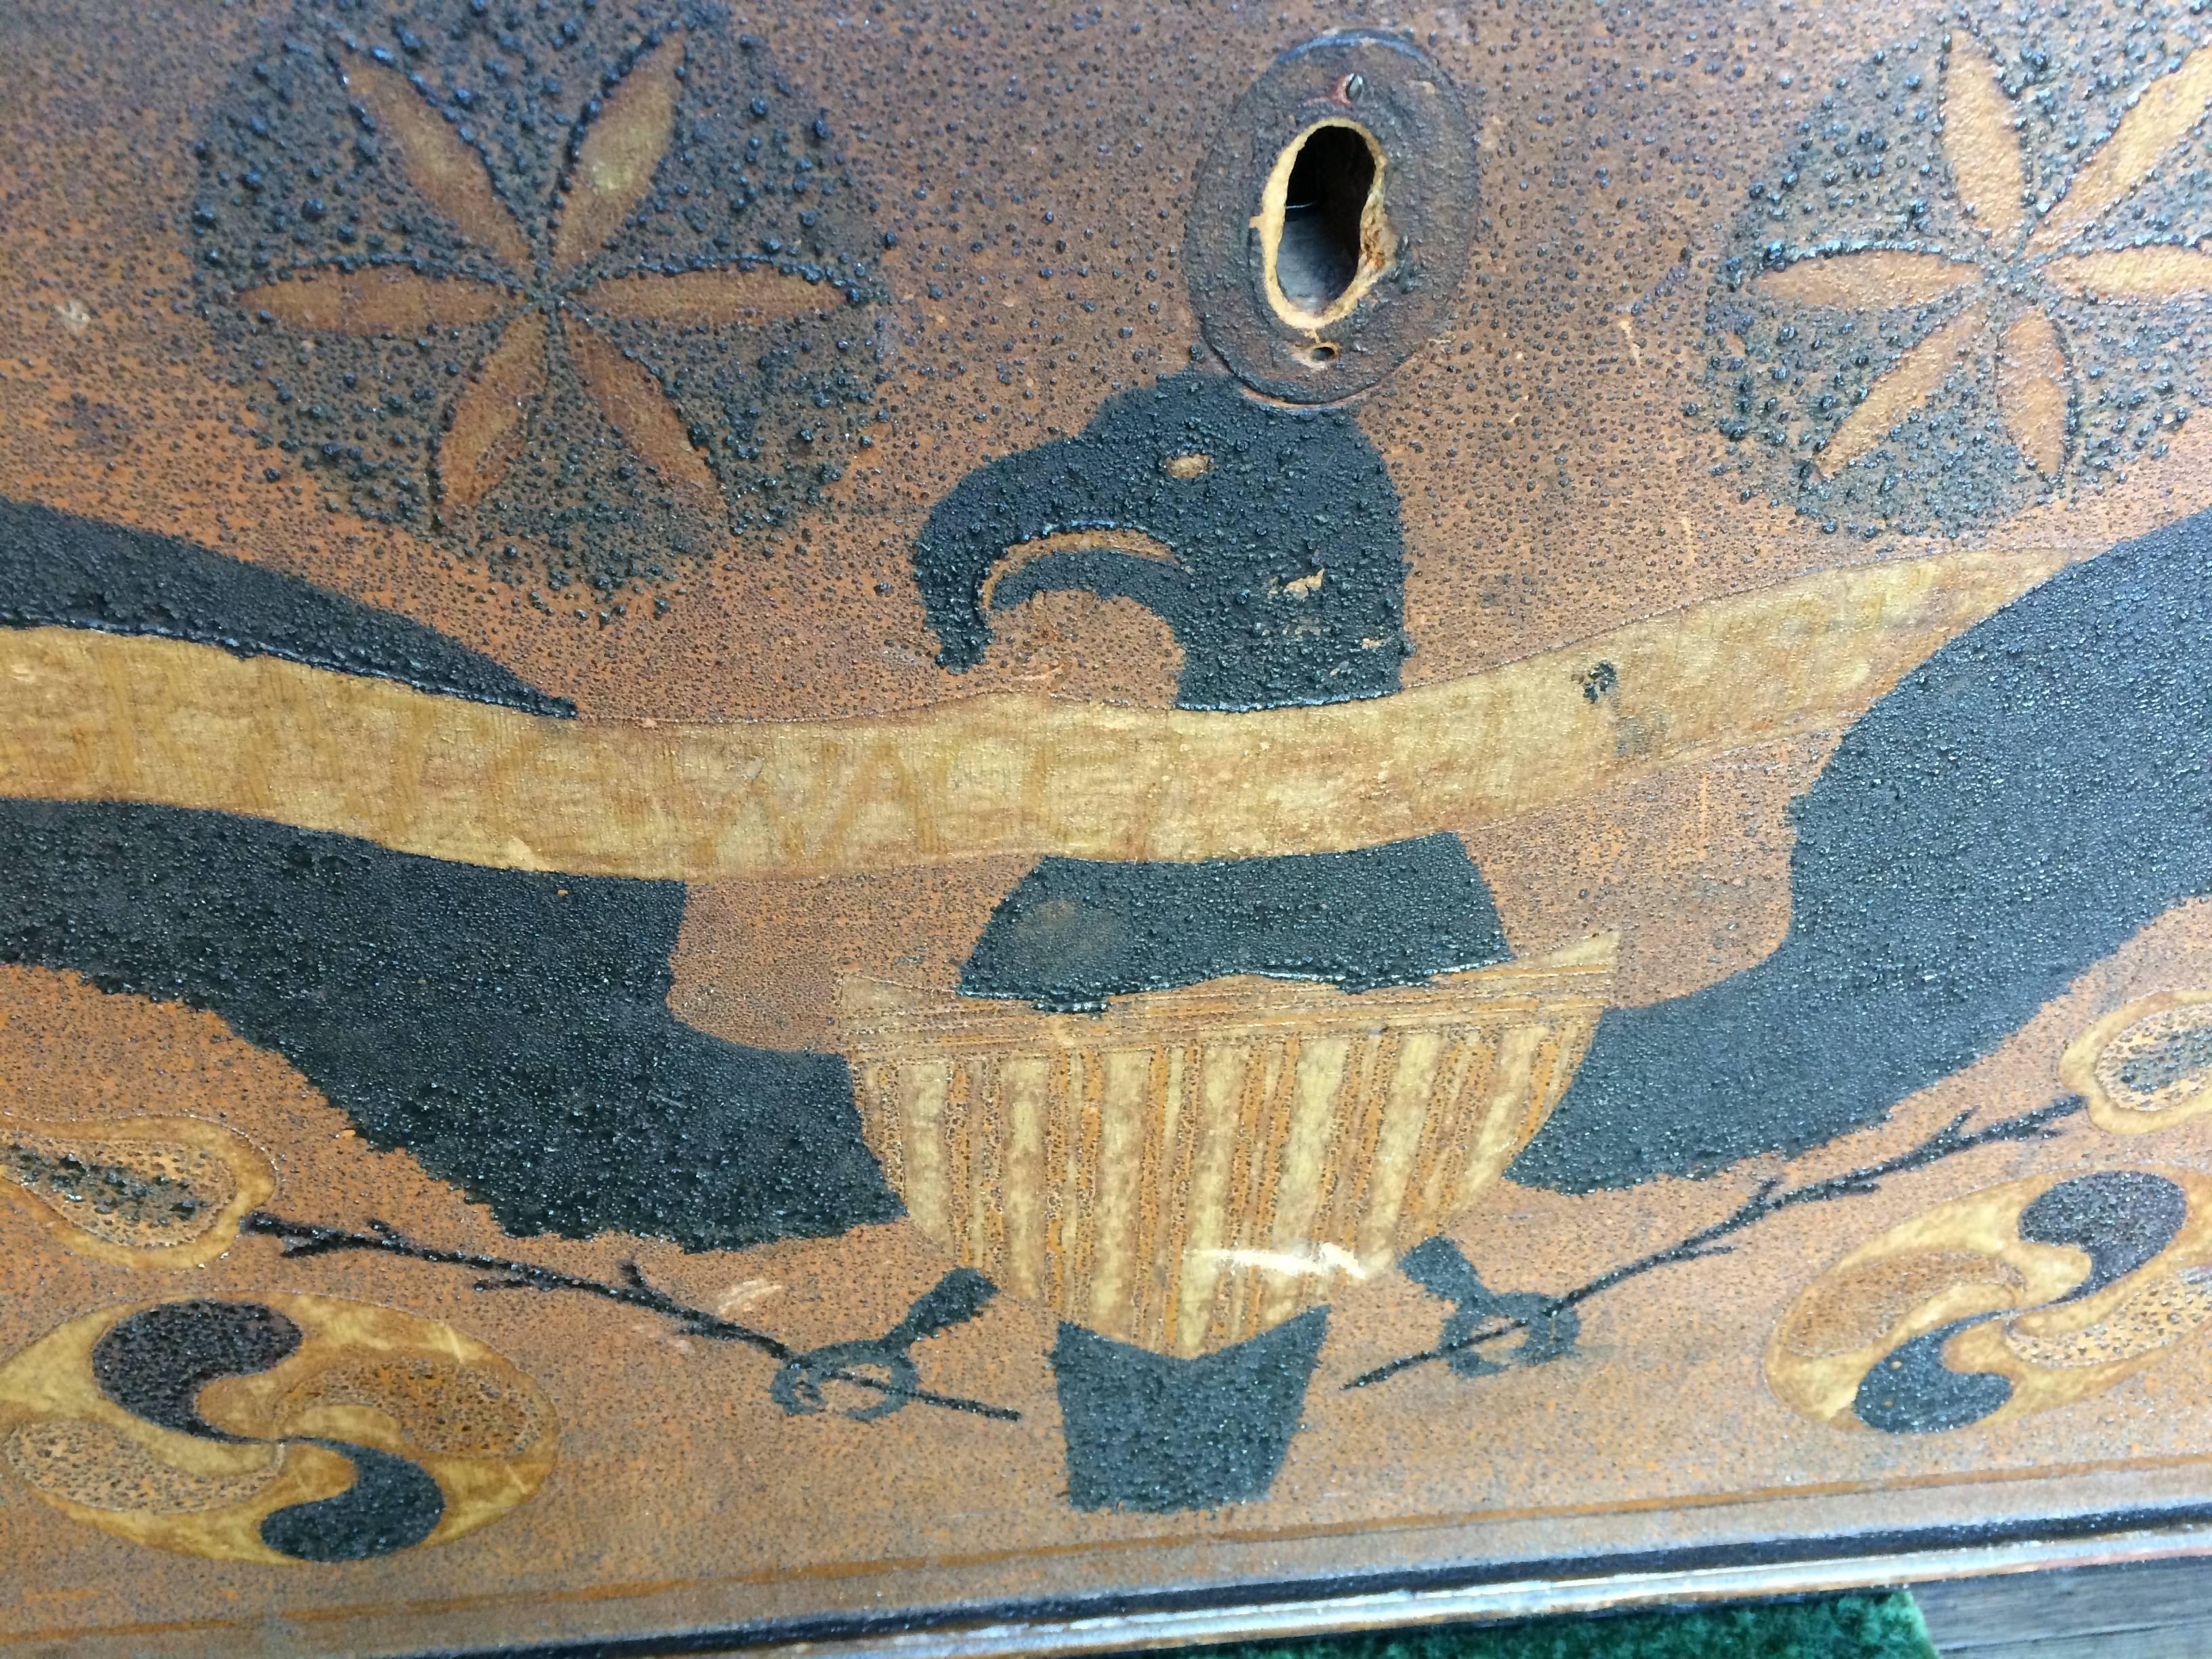 Part of a distinct group of “Eagle” chest found in Centre county, Pennsylvania, this example was made for “Margrate Wagener” (Margaret Wagner) and is dated “1817” inscribed on a banner between the eagle’s wings. The eagle is encircled with hex